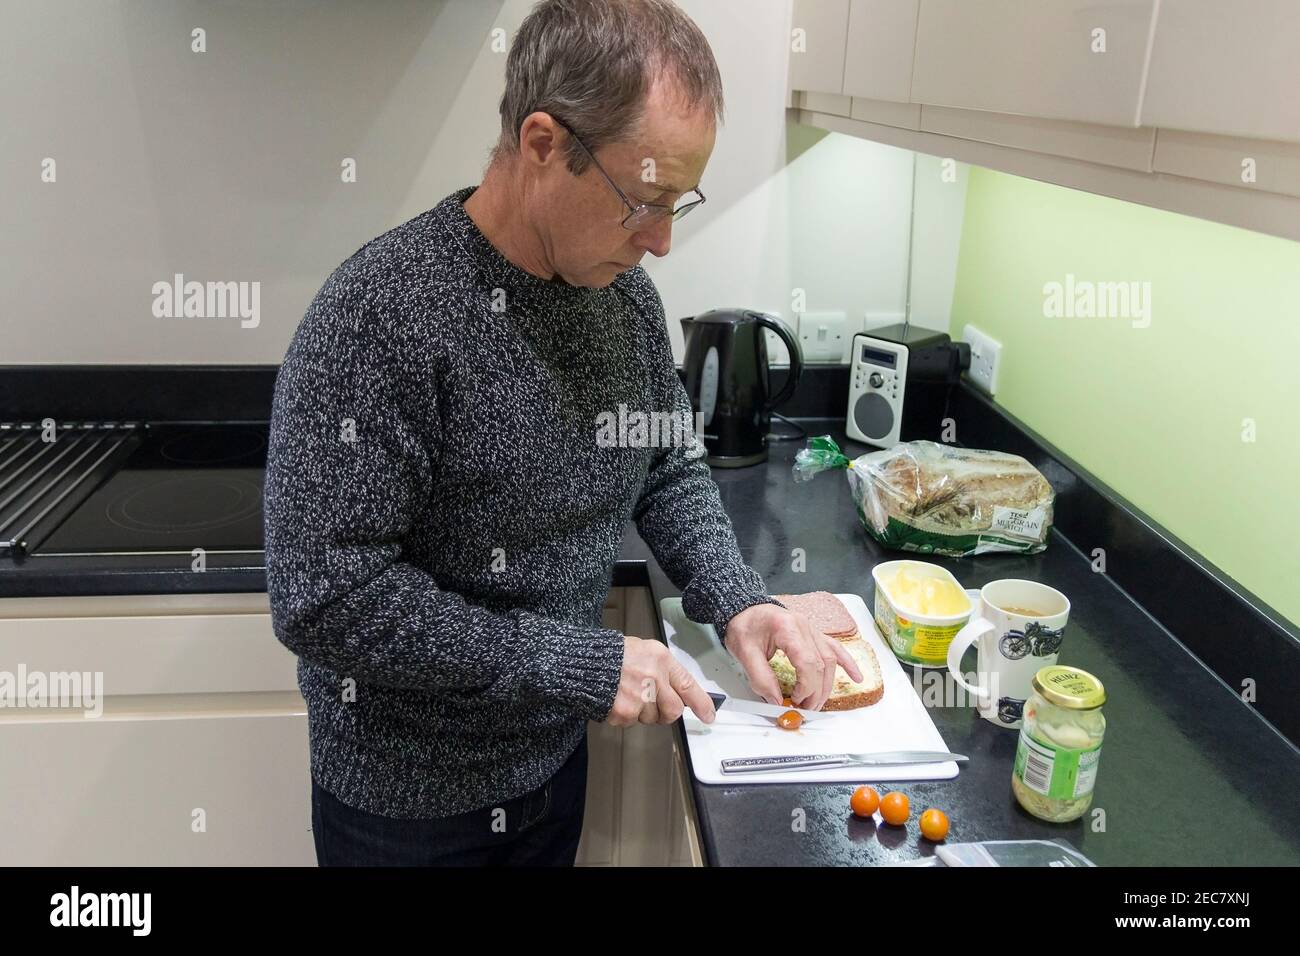 Sandwich making pensioner male making a corned beef and tomato sandwich at home in the kitchen during lock down 2020. One self image of seven taken. Stock Photo